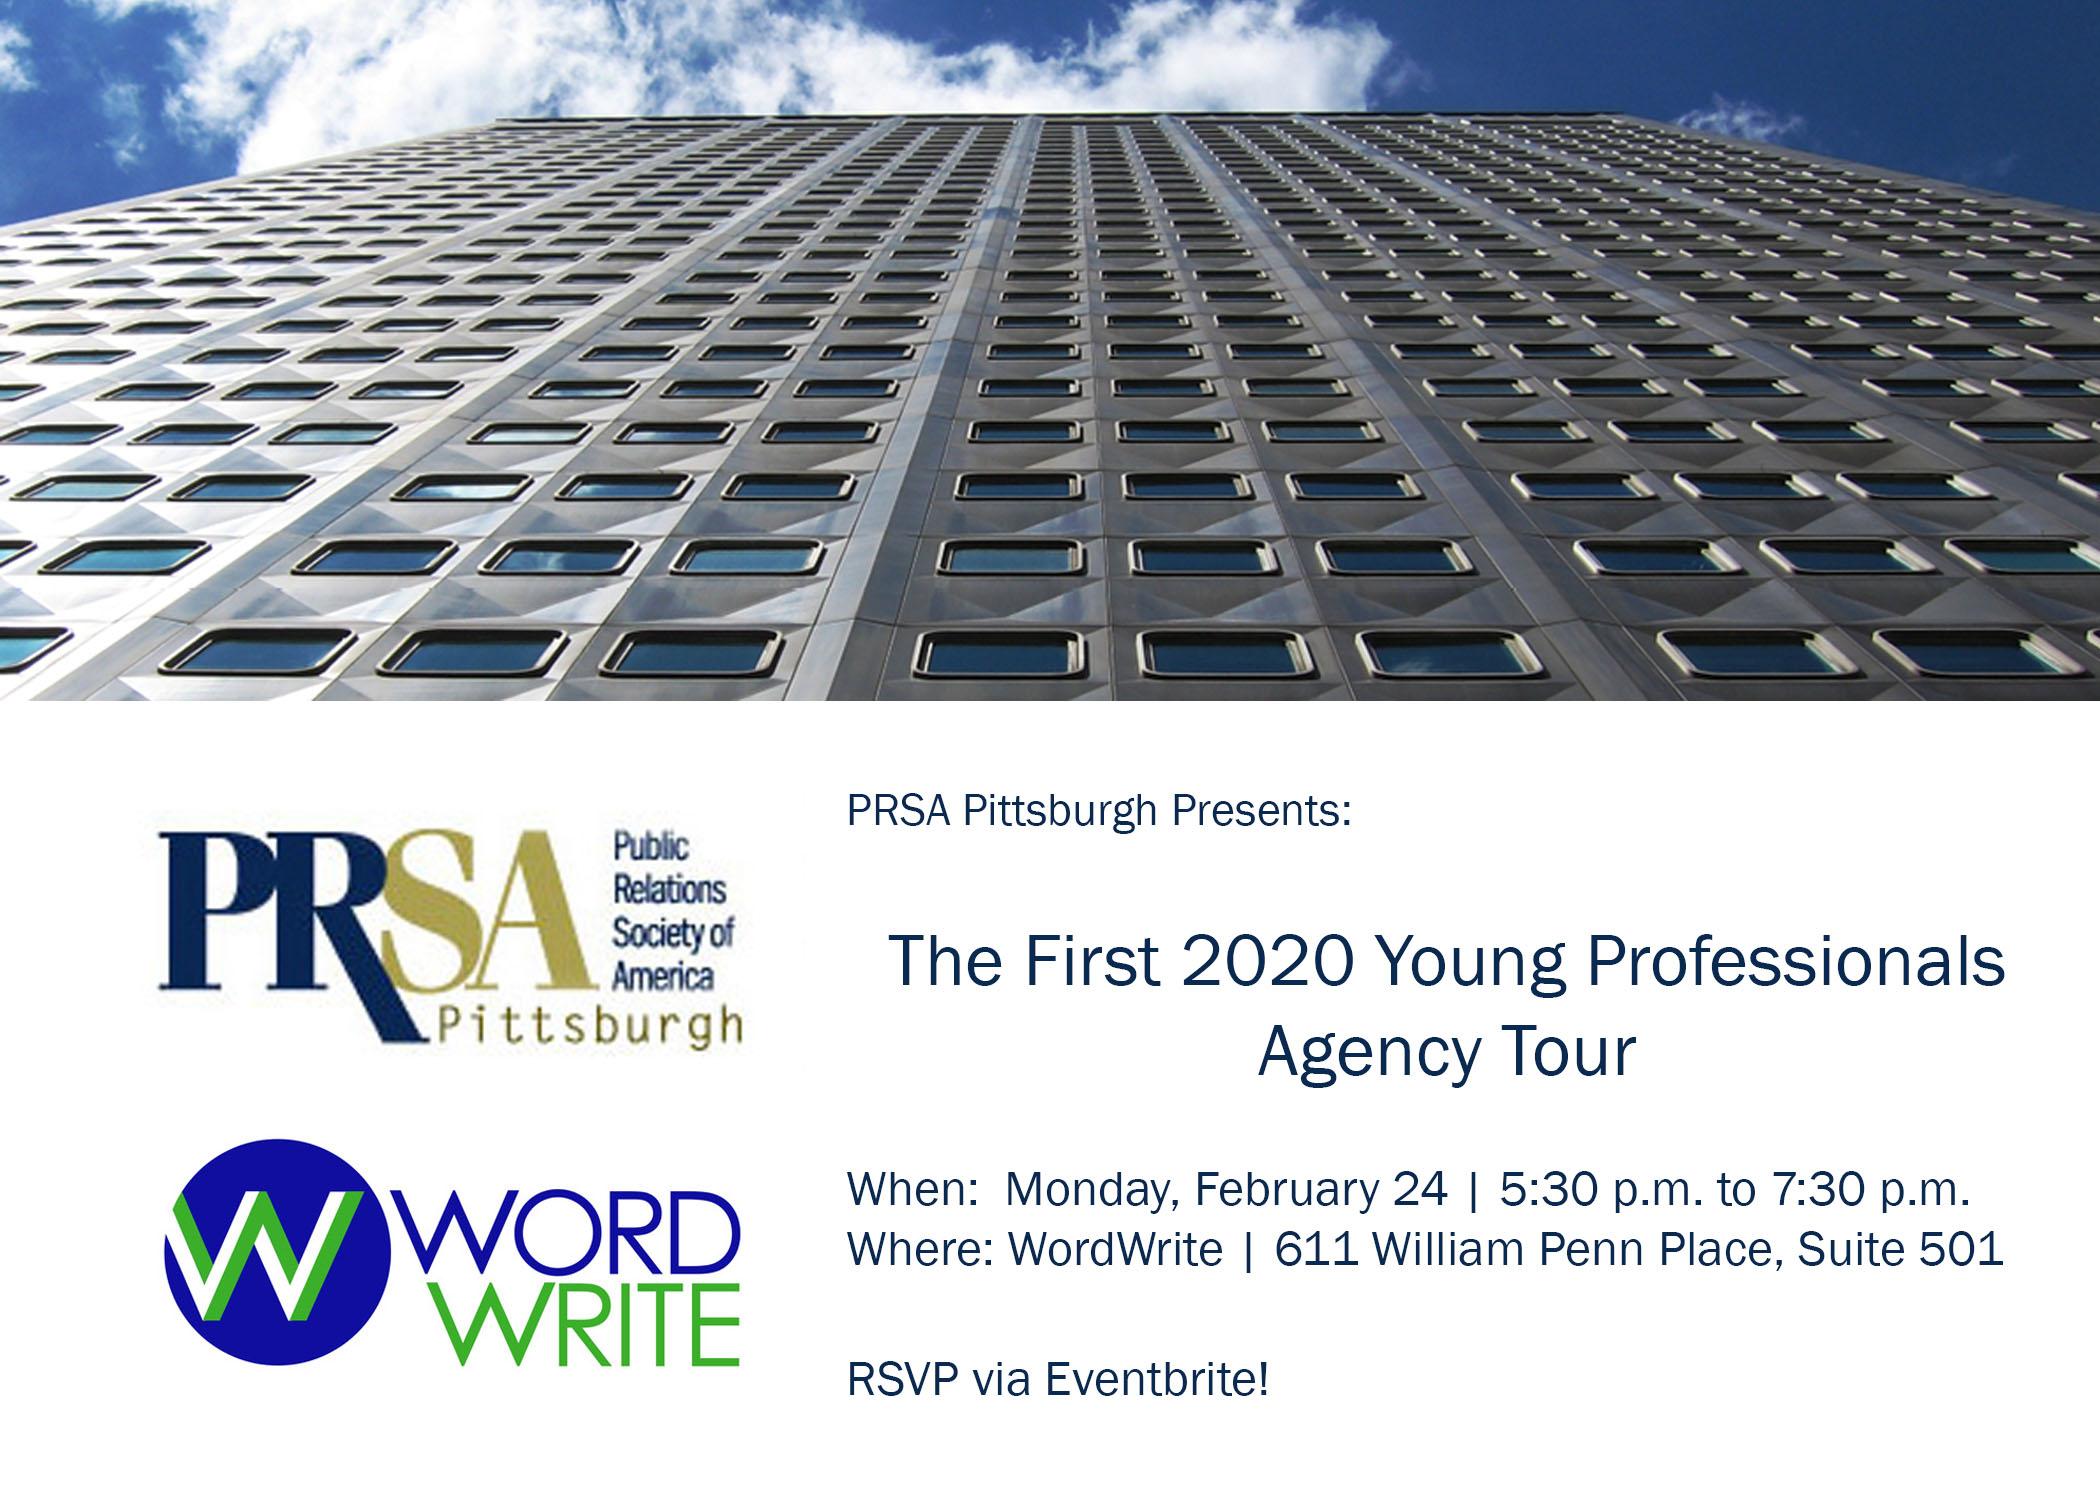 Inside WordWrite: A PRSA Young Professionals Agency Tour